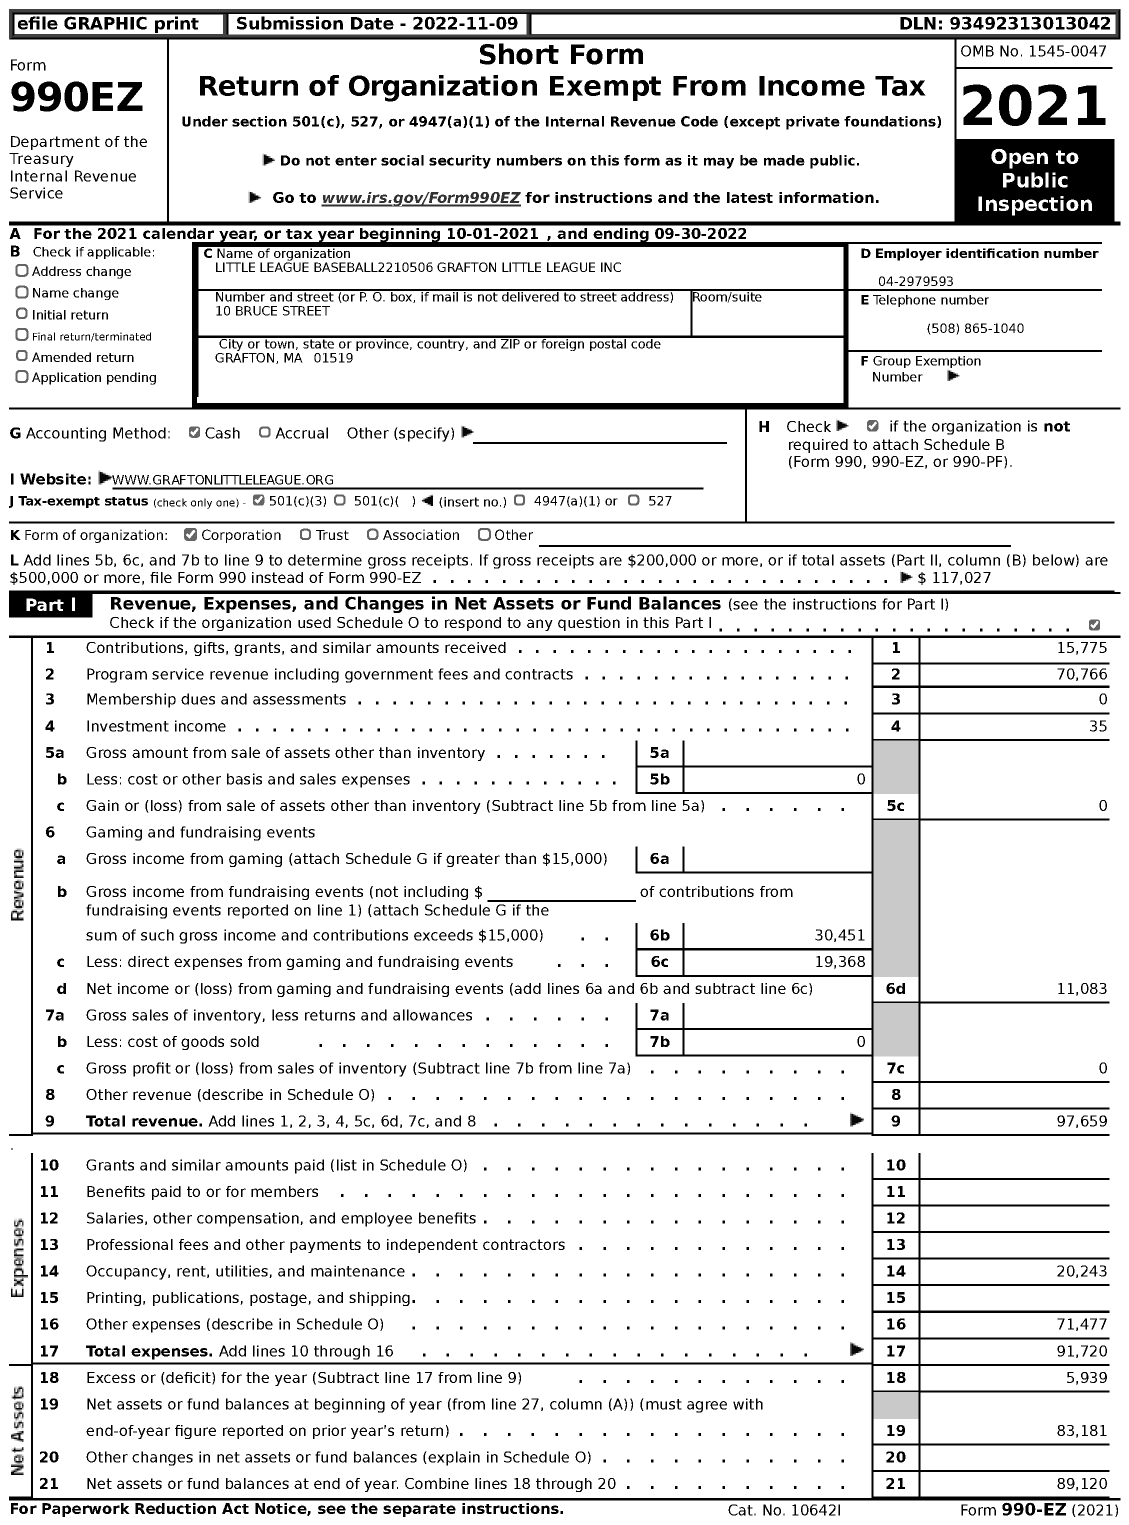 Image of first page of 2021 Form 990EZ for Little League Baseball 2210506 Grafton Little League